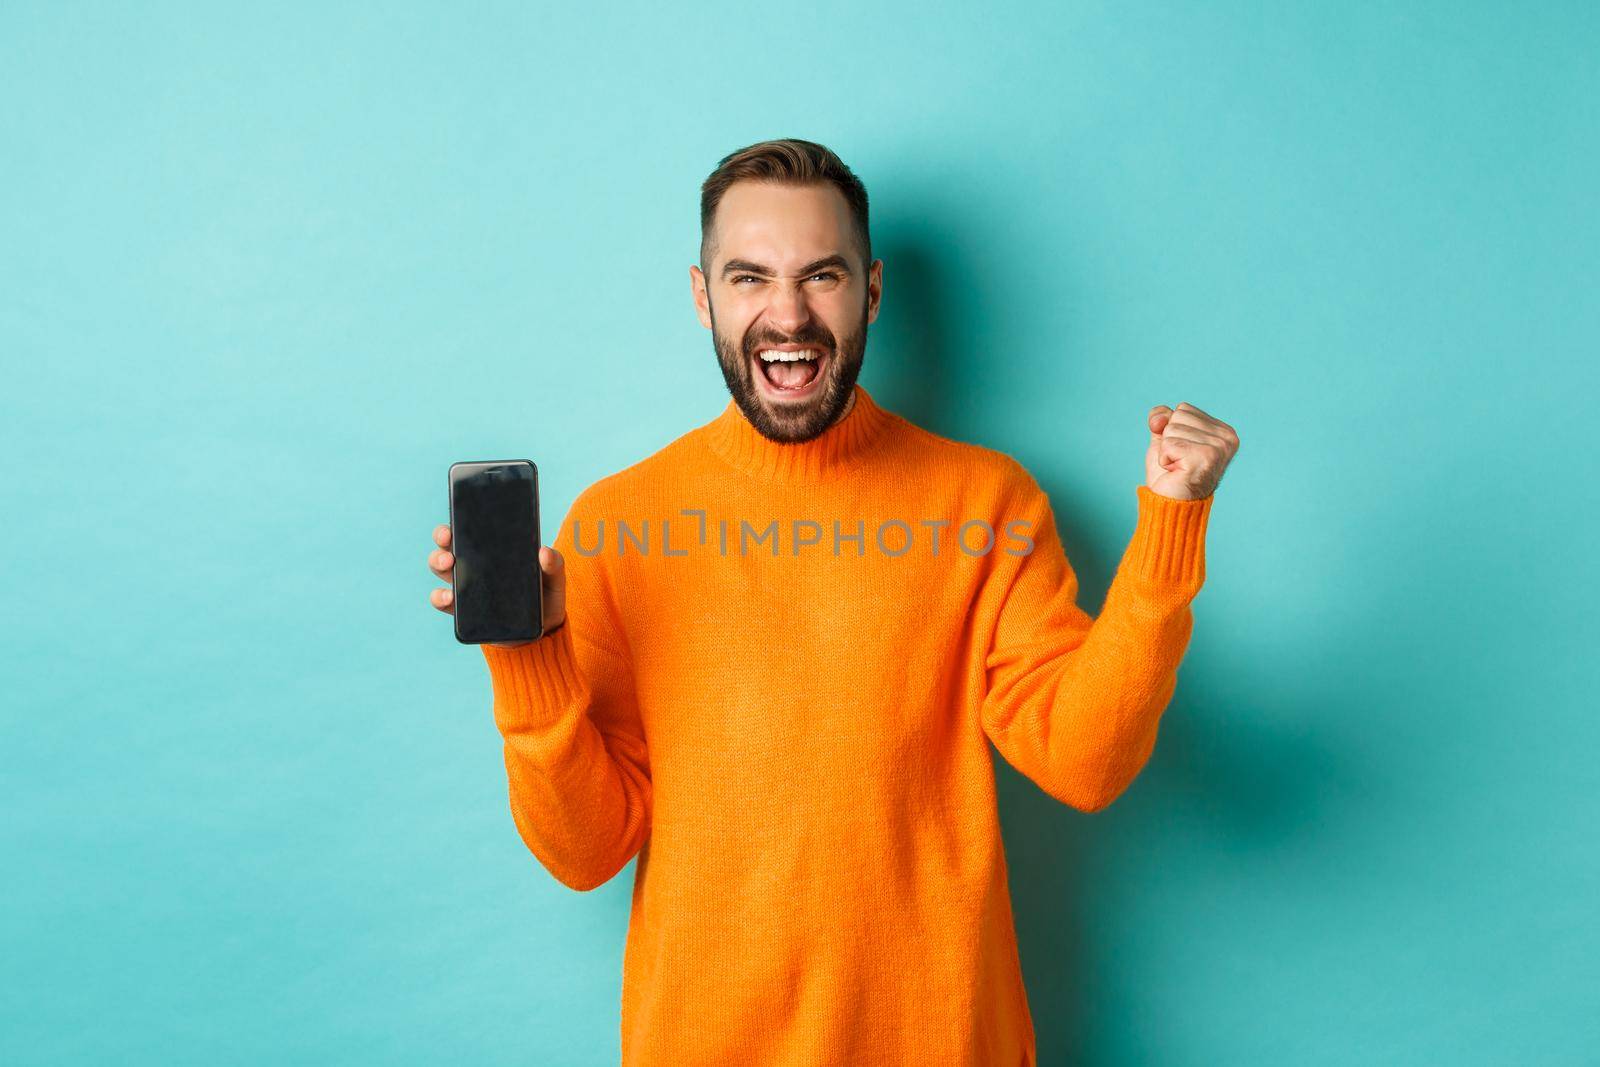 Image of happy young man winning and showing mobile phone screen, rejoicing and celebrating victory, fist pump with satisfaction, standing over light blue background.